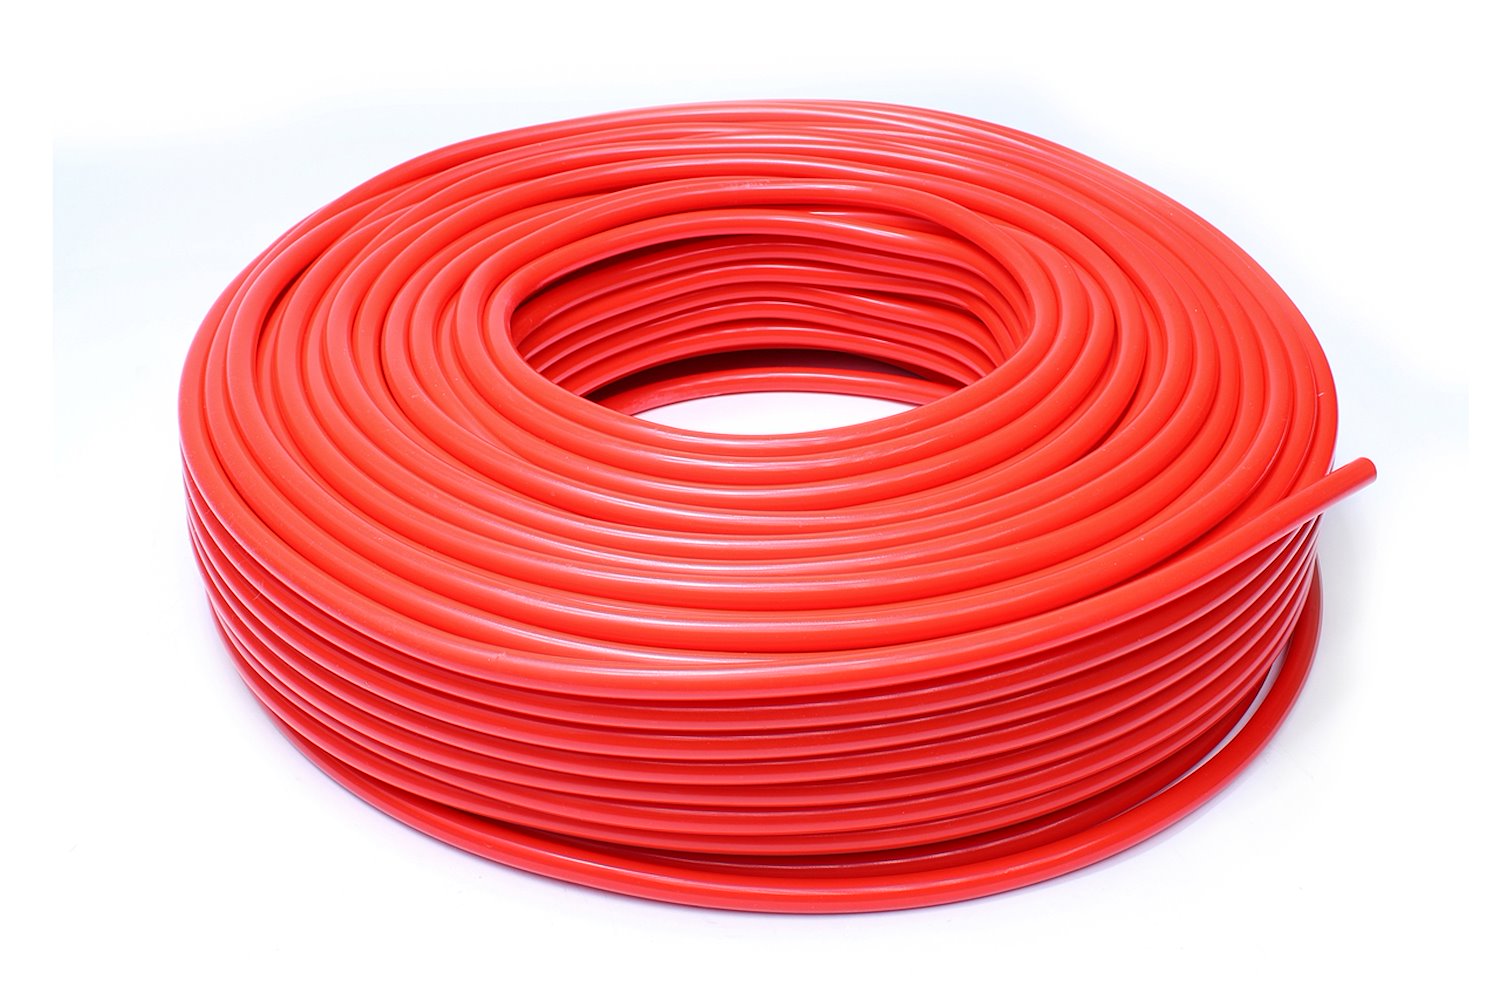 HTSVH2-REDx50 High-Temperature Silicone Vacuum Hose Tubing, 5/64 in. ID, 50 ft. Roll, Red